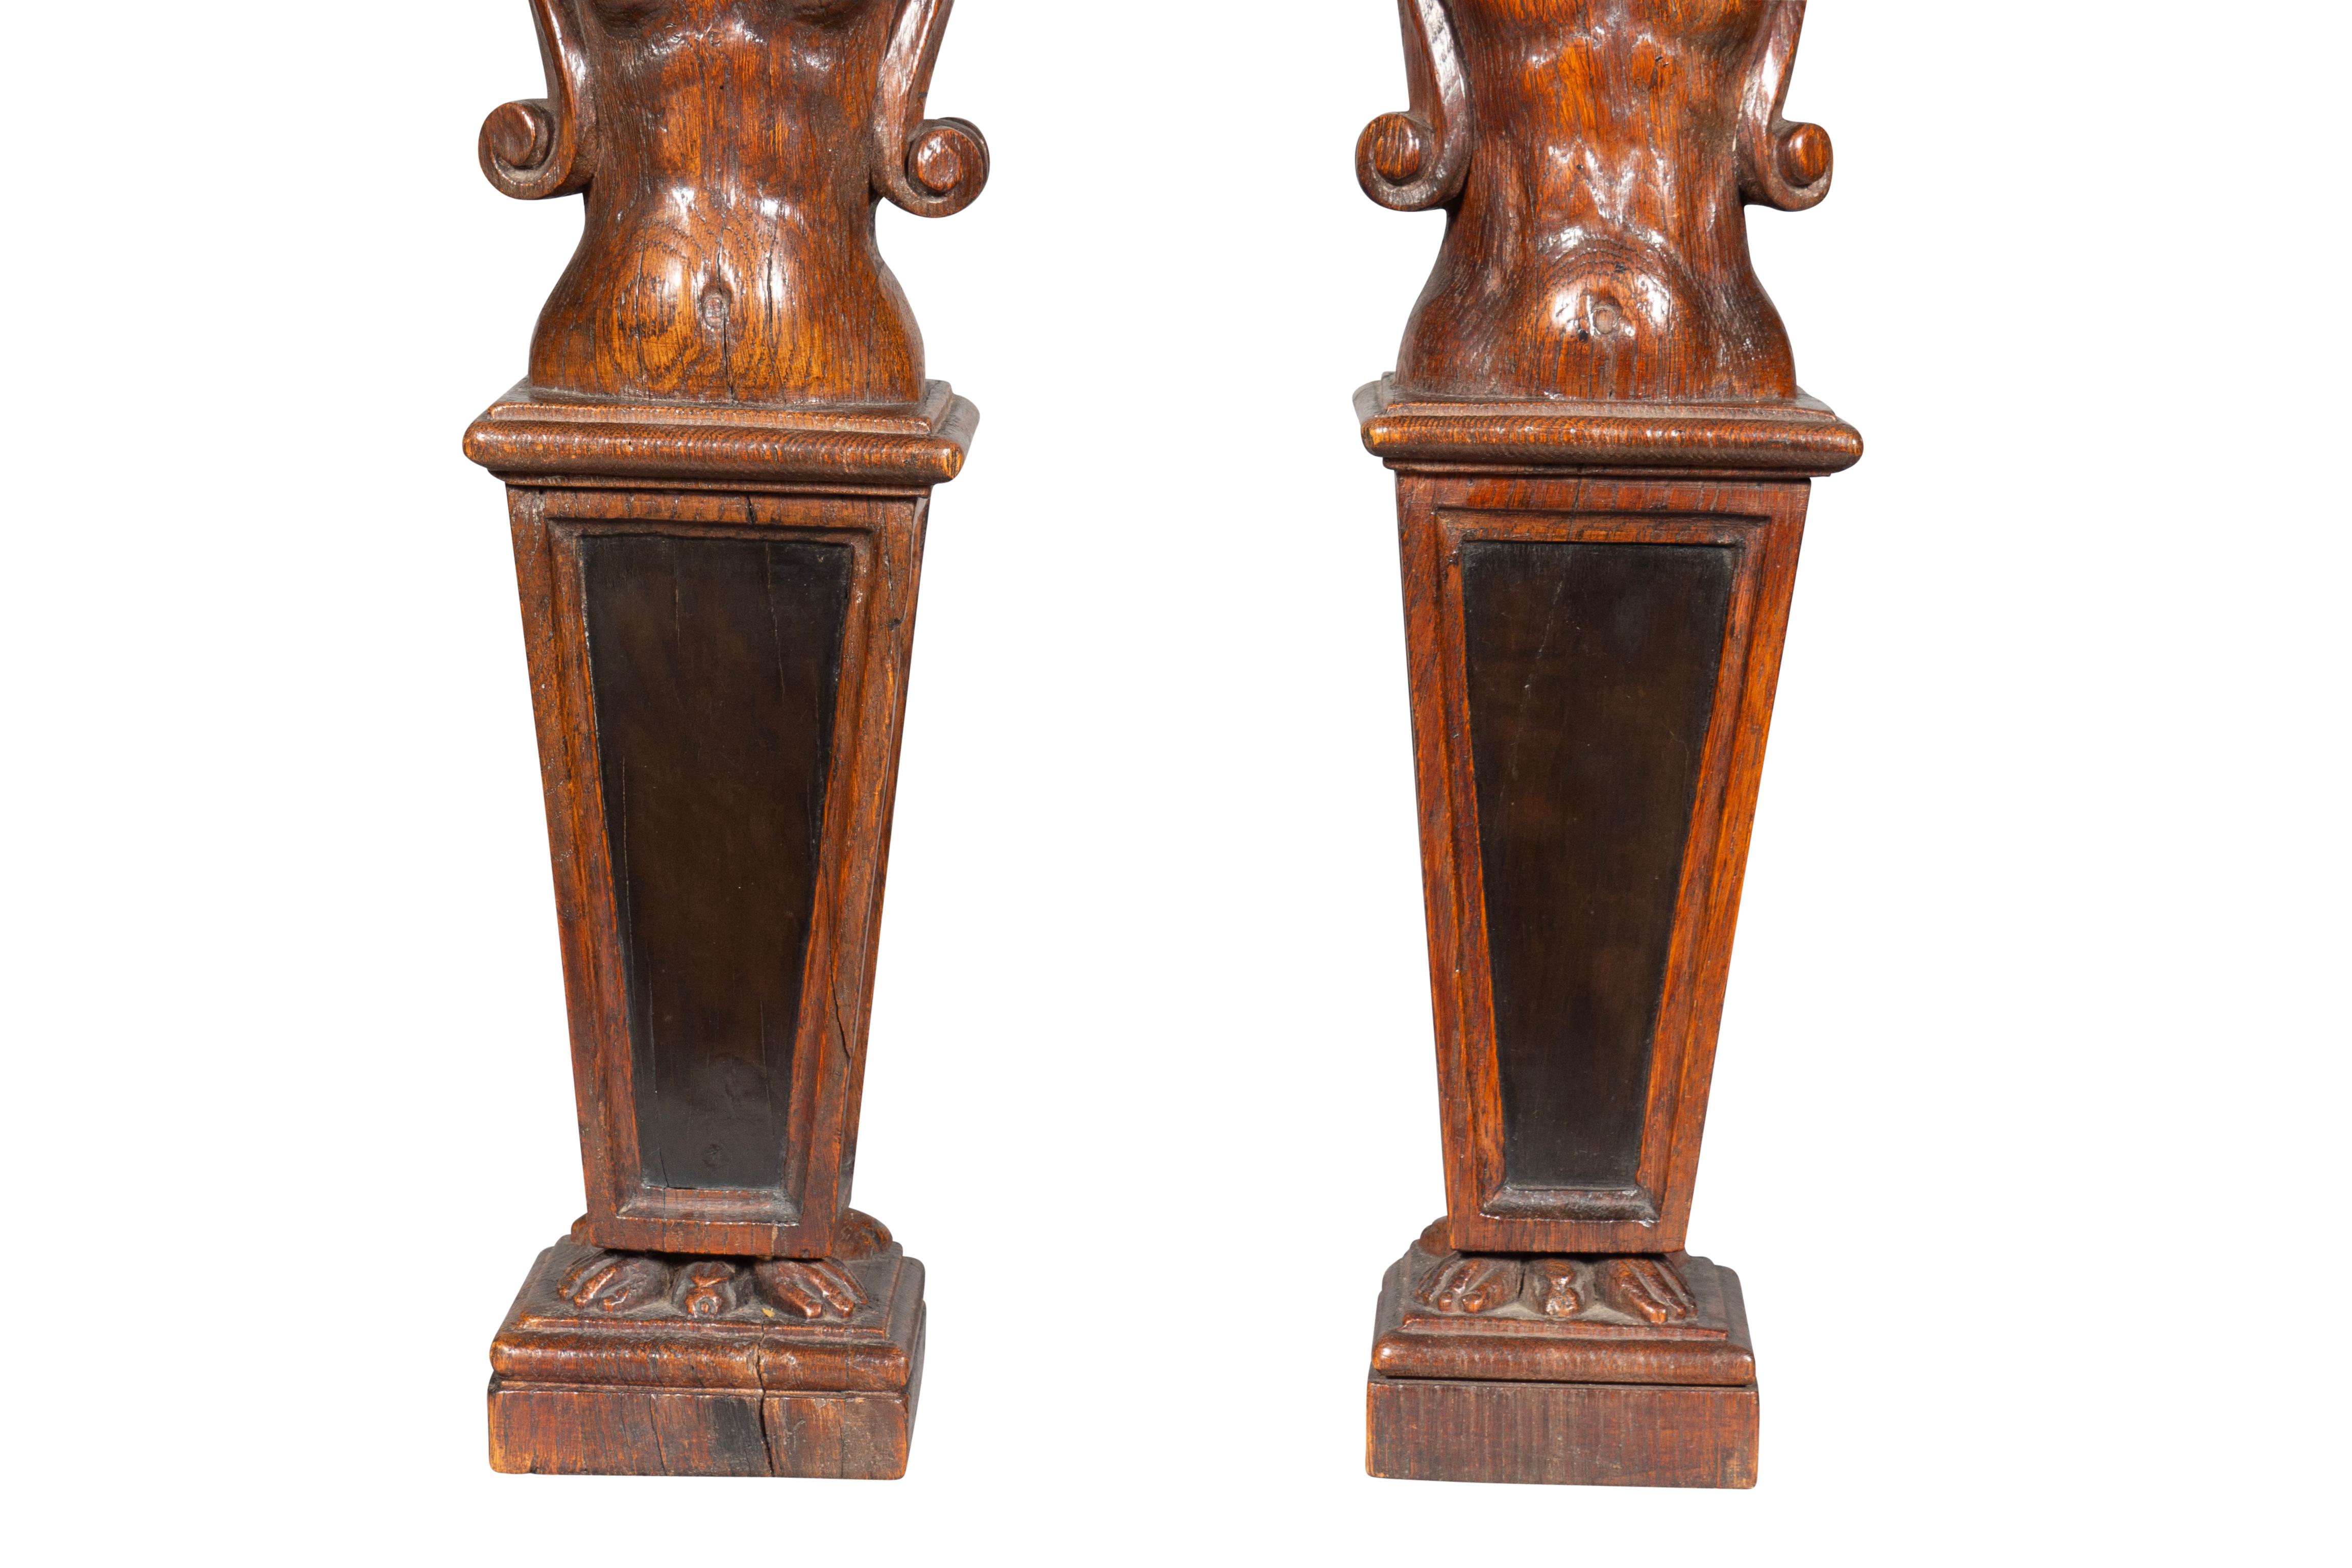 Pair Of Flemish Baroque Carved Oak And Ebony Figural Caryatids For Sale 5